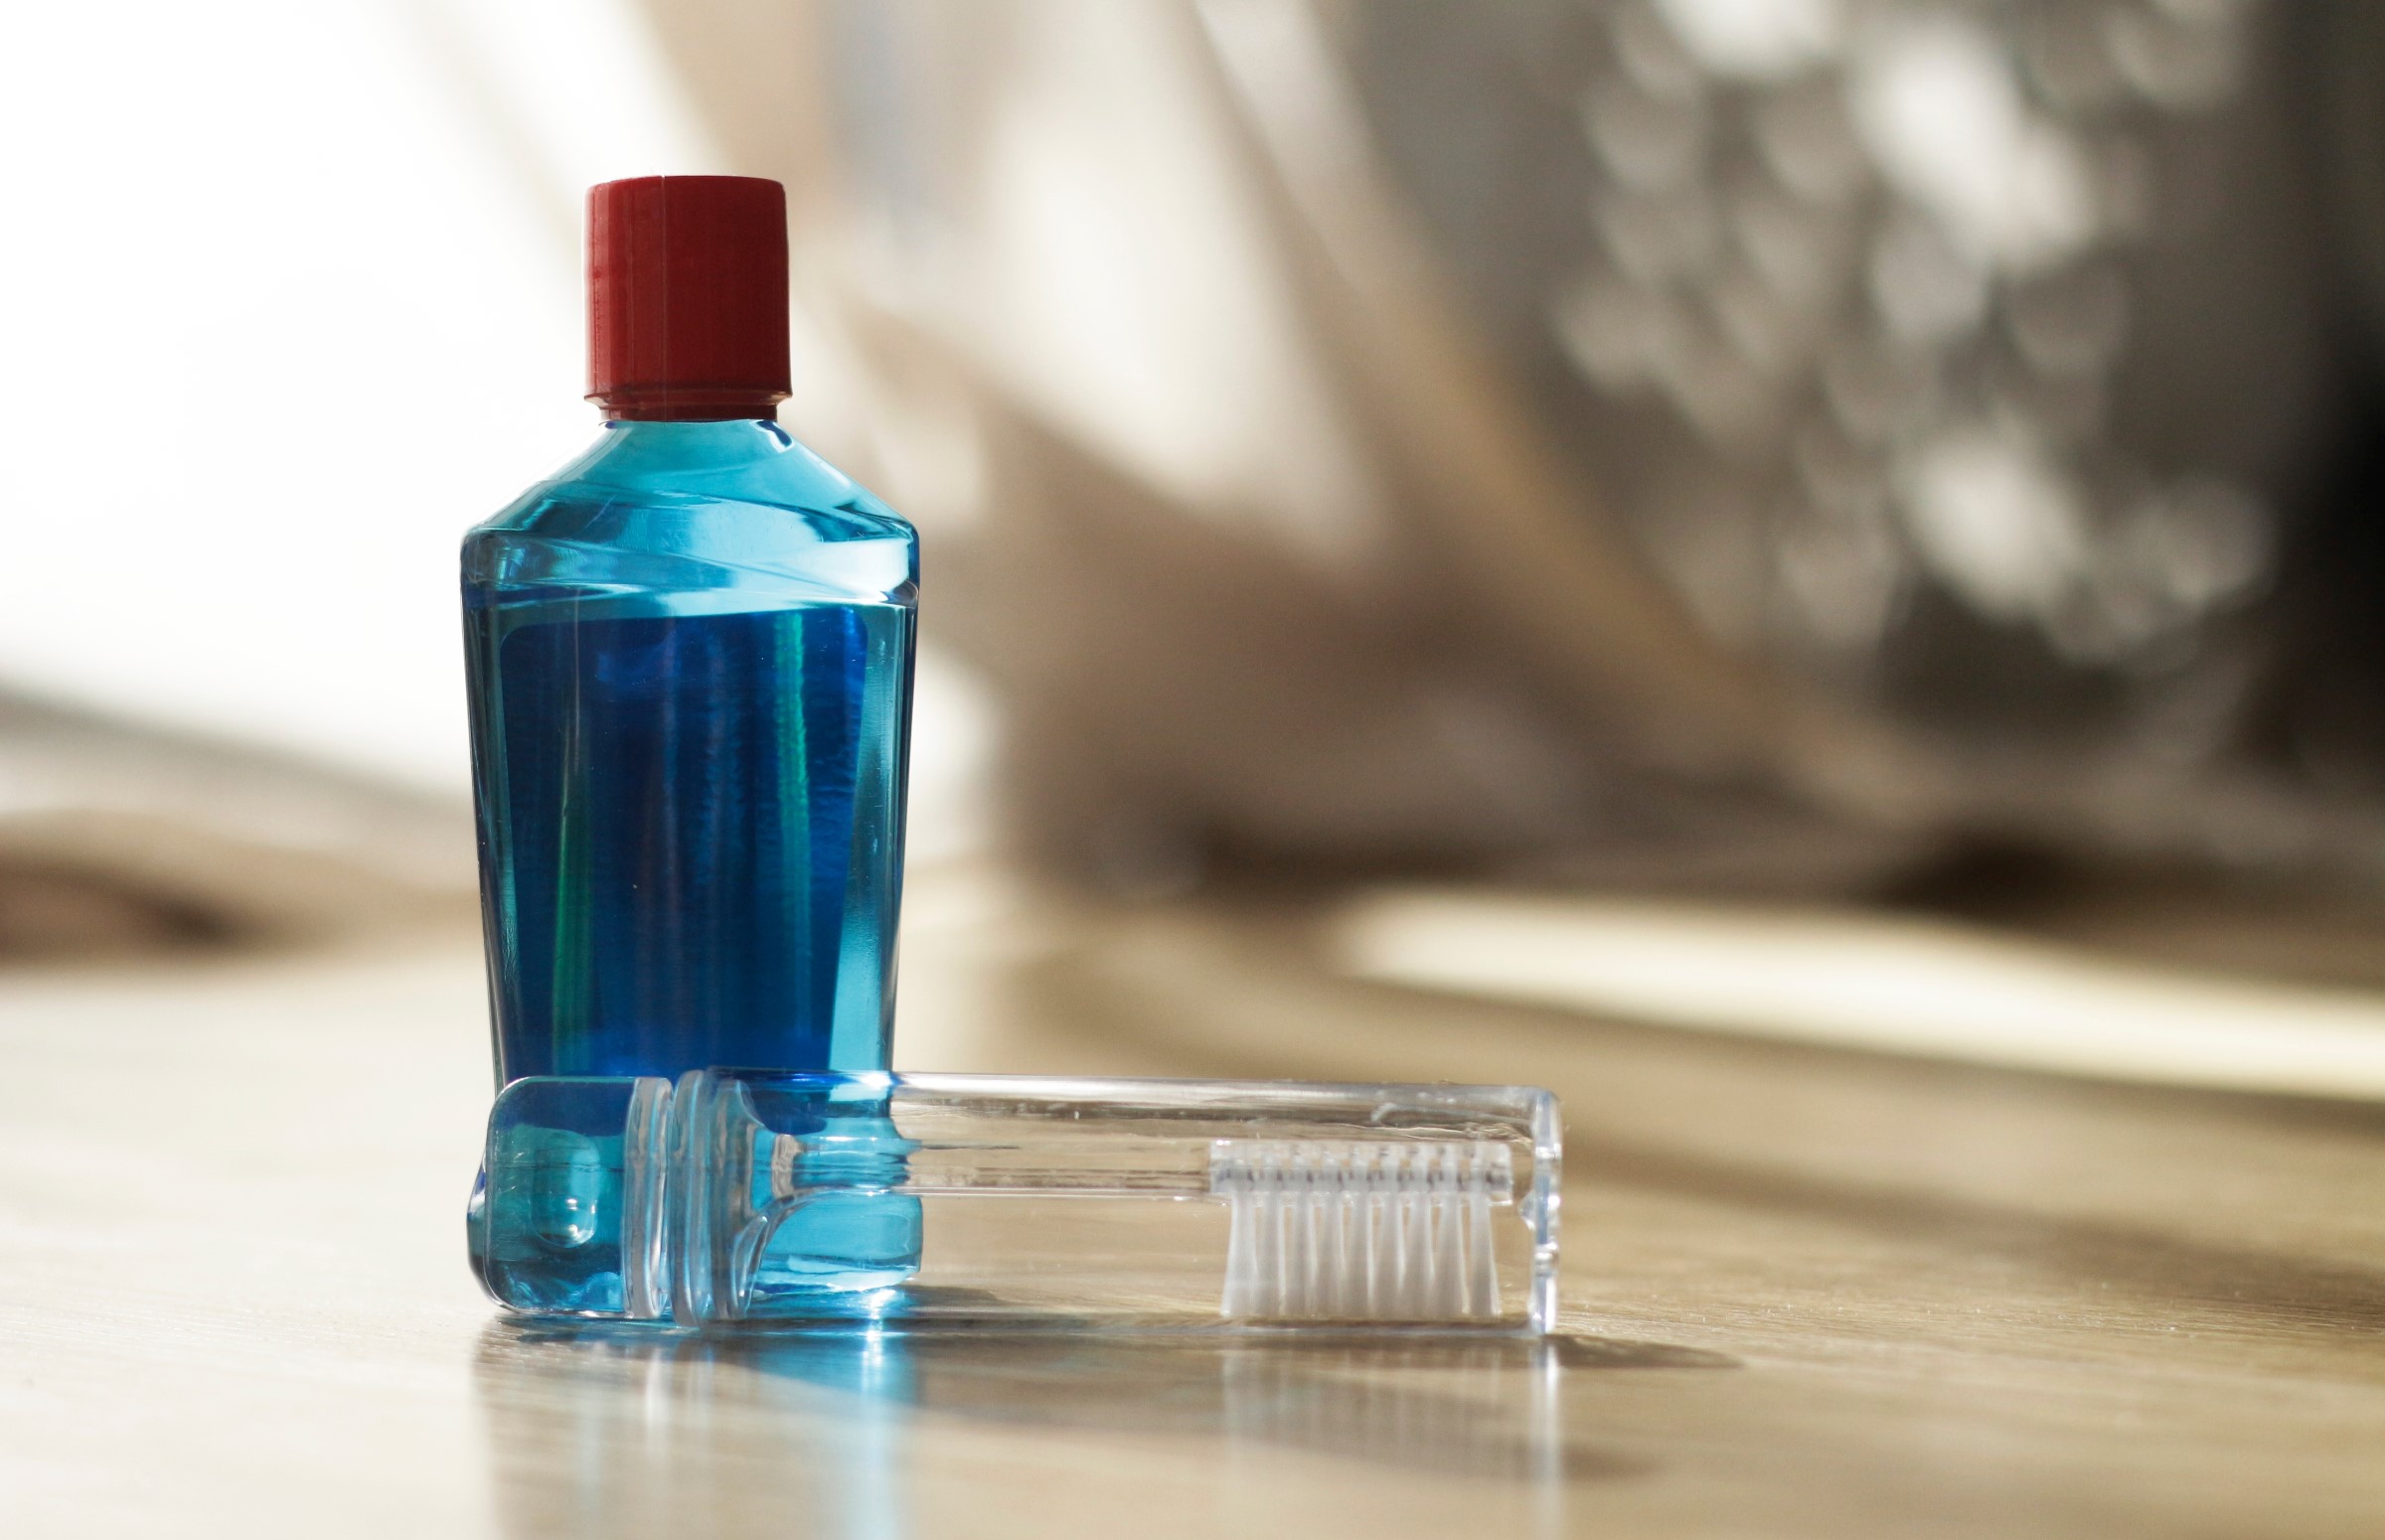 fluoride mouthwash and toothbrush